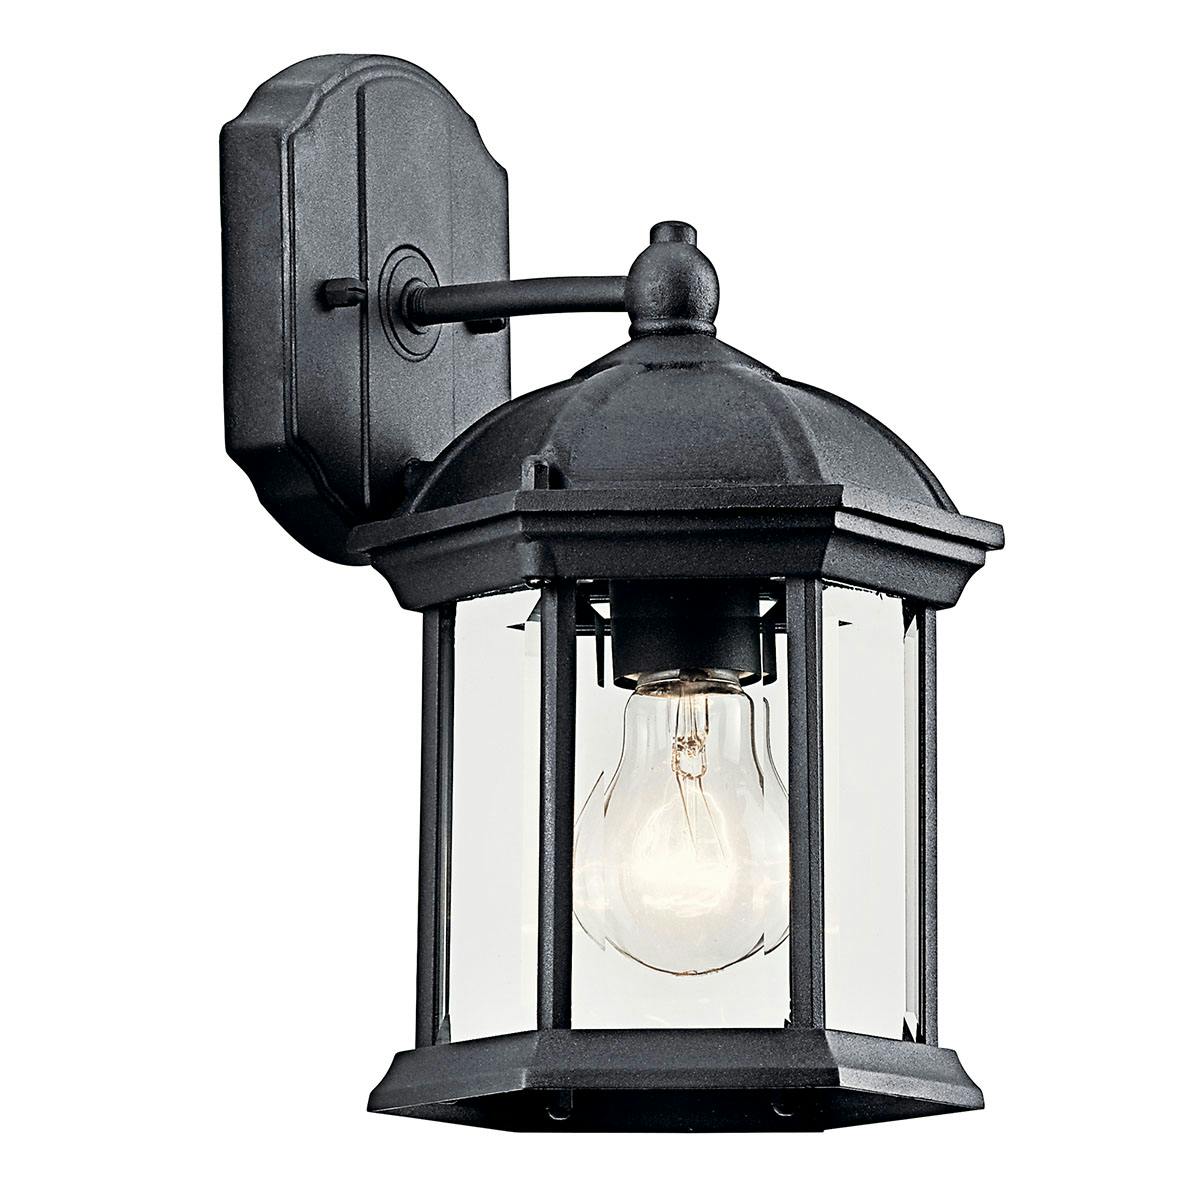 Barrie 10.25" Wall Light in Black on a white background